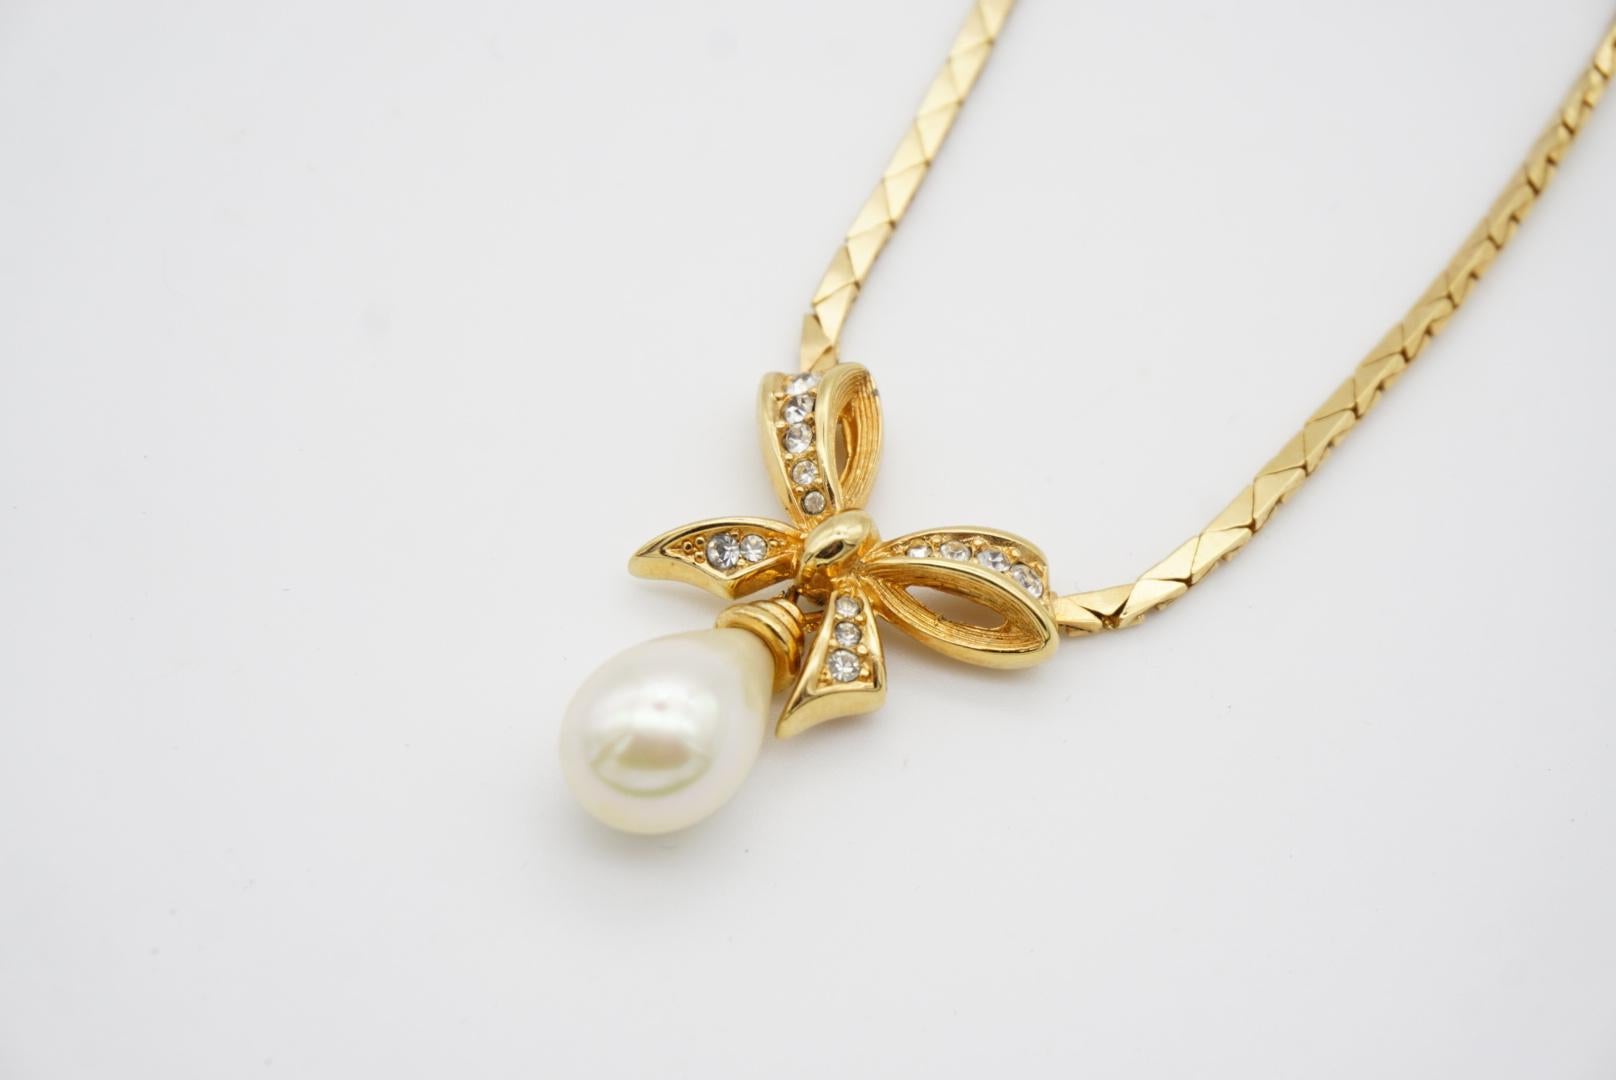 Christian Dior Vintage 1980s Knot Bow Water Drop Pearl Crystals Pendant Necklace For Sale 7